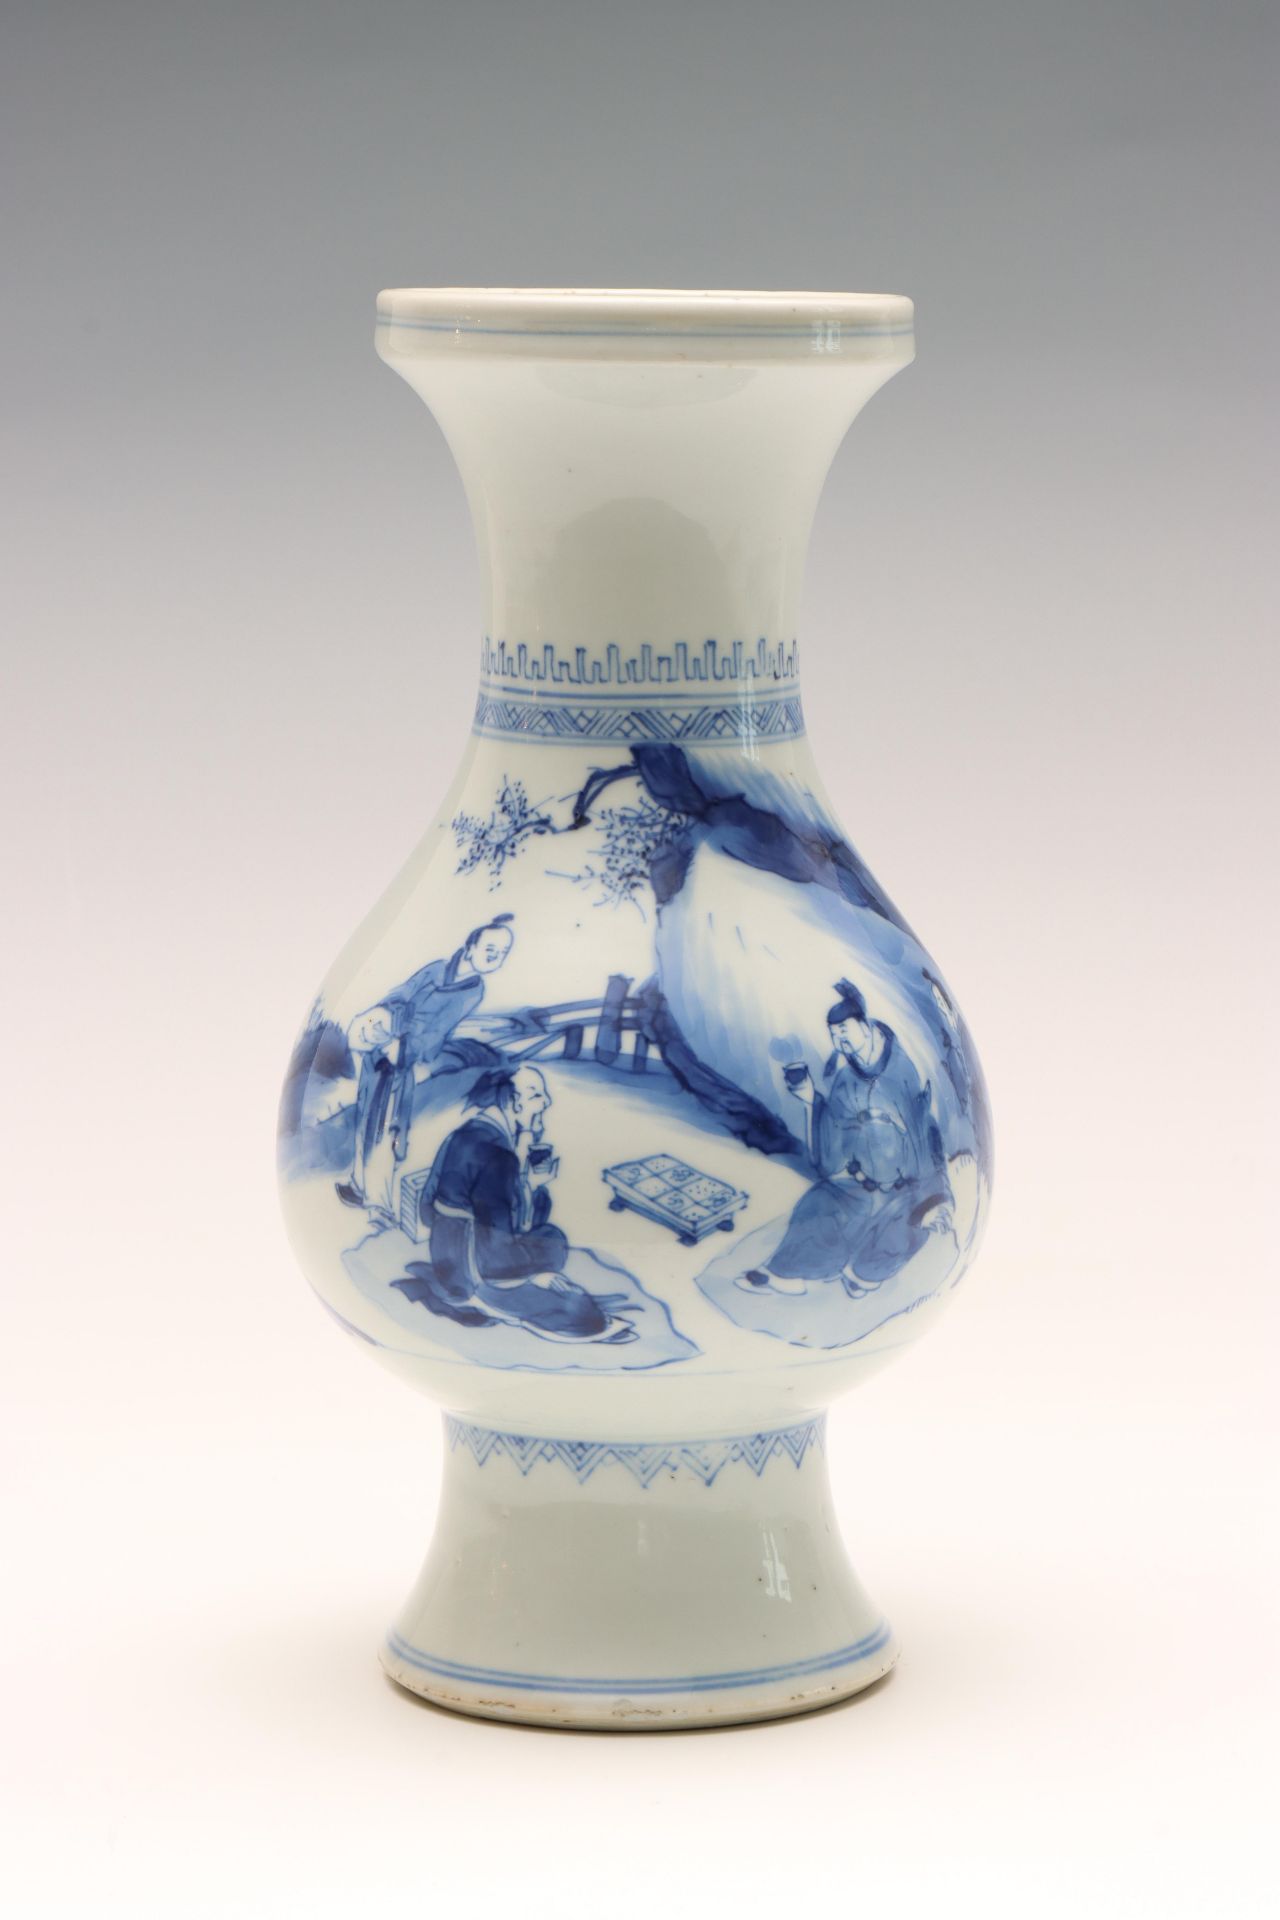 China, blue and white Transitional porcelain 'scholars' vase, mid-17th century,